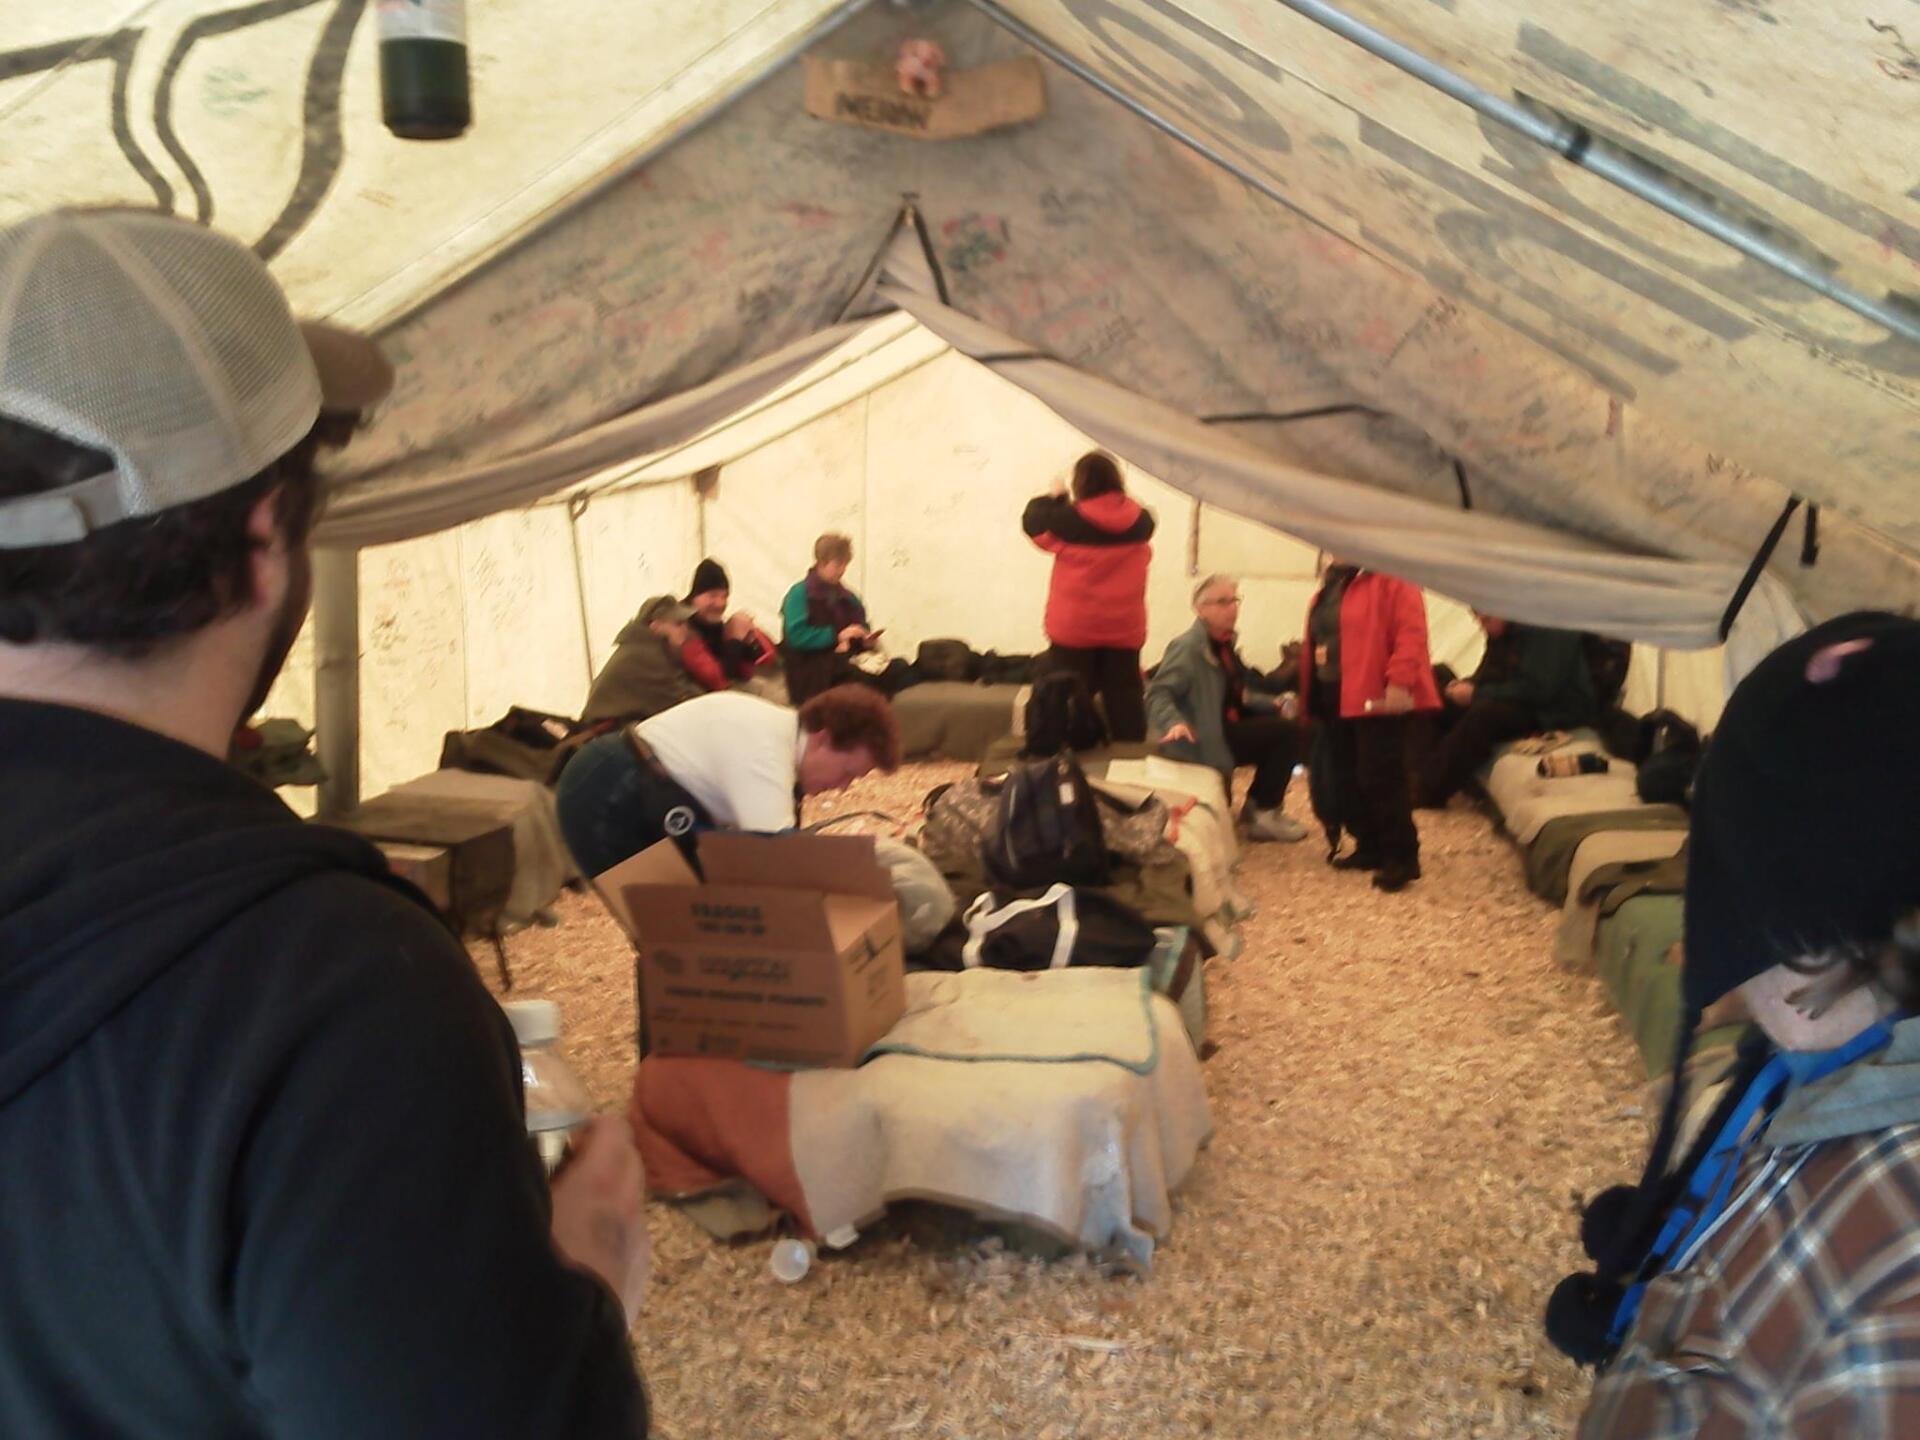 People inside a tent arranging their things